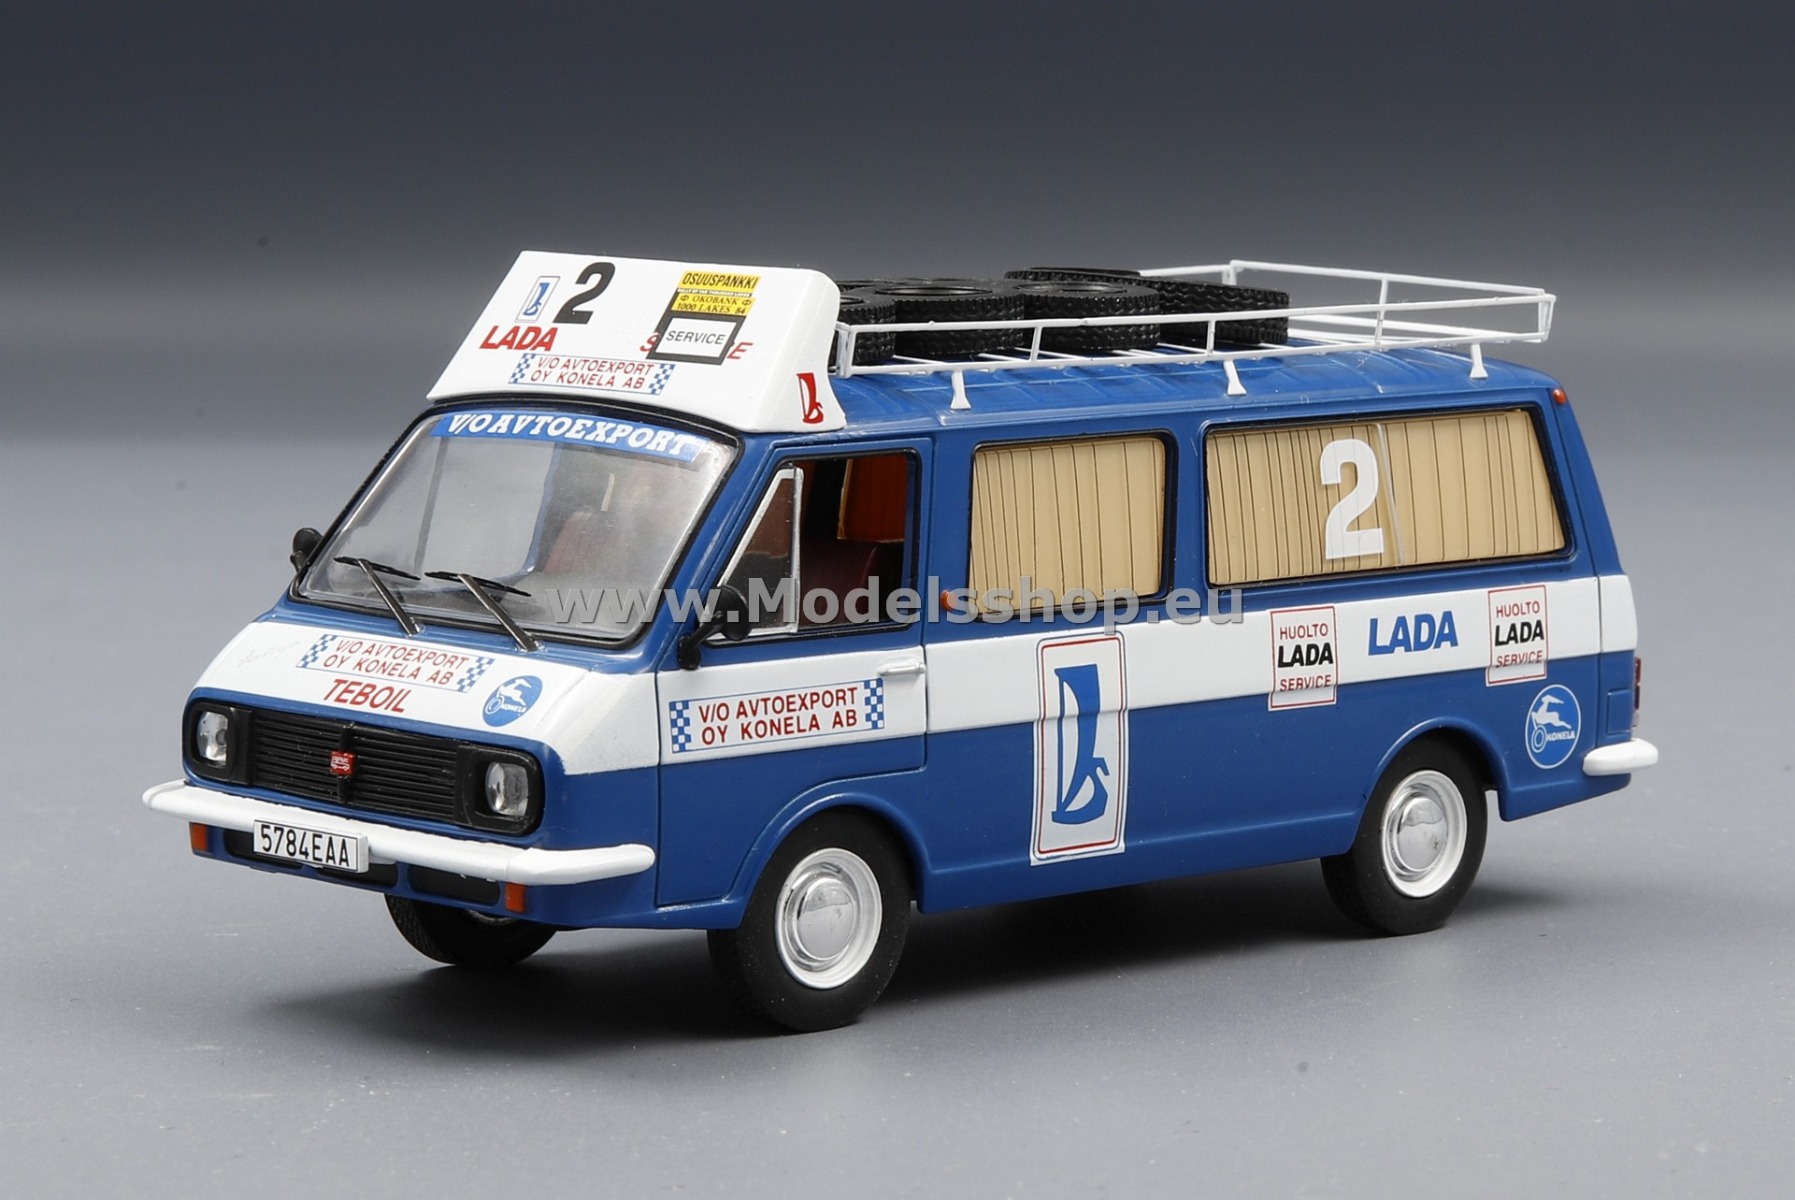 RAF 2203 Latvia, Lada Rally service, 1000 Lakes 1984 Rally Assistance, with roof rack and spare wheels